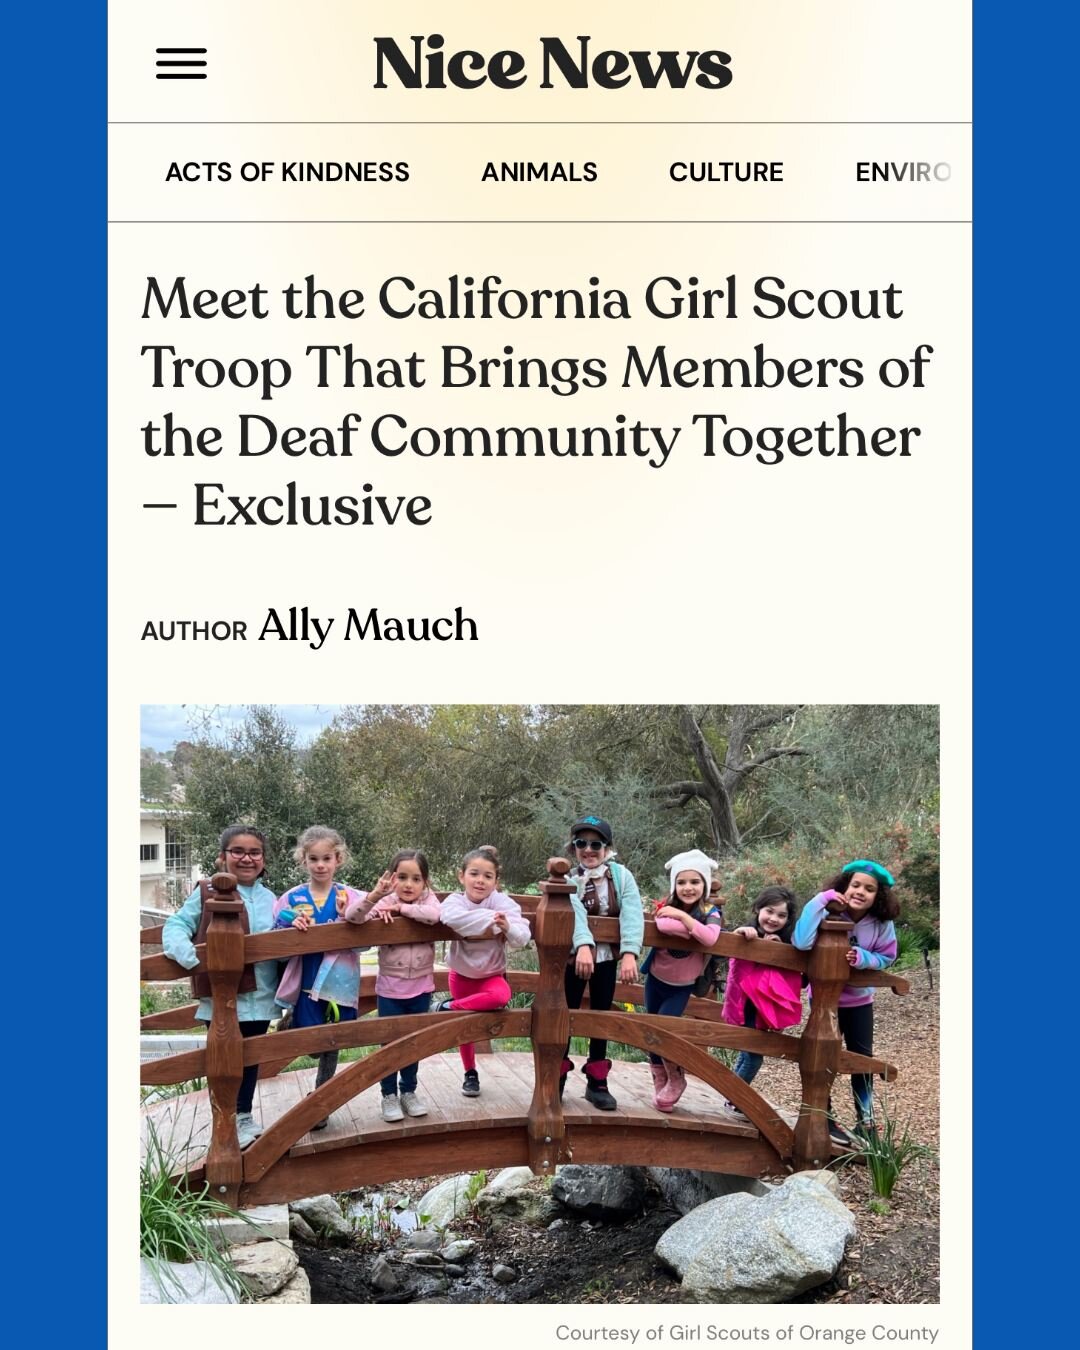 ⭐ Our local Girl Scouts troop was featured on Nice News! ⭐
(Thank you @nicenewshq )

You can access article from my bio or DM me &ldquo;Article&rdquo; and I will send it to you.

I&rsquo;m highlighting some excerpts from this article that stood out t